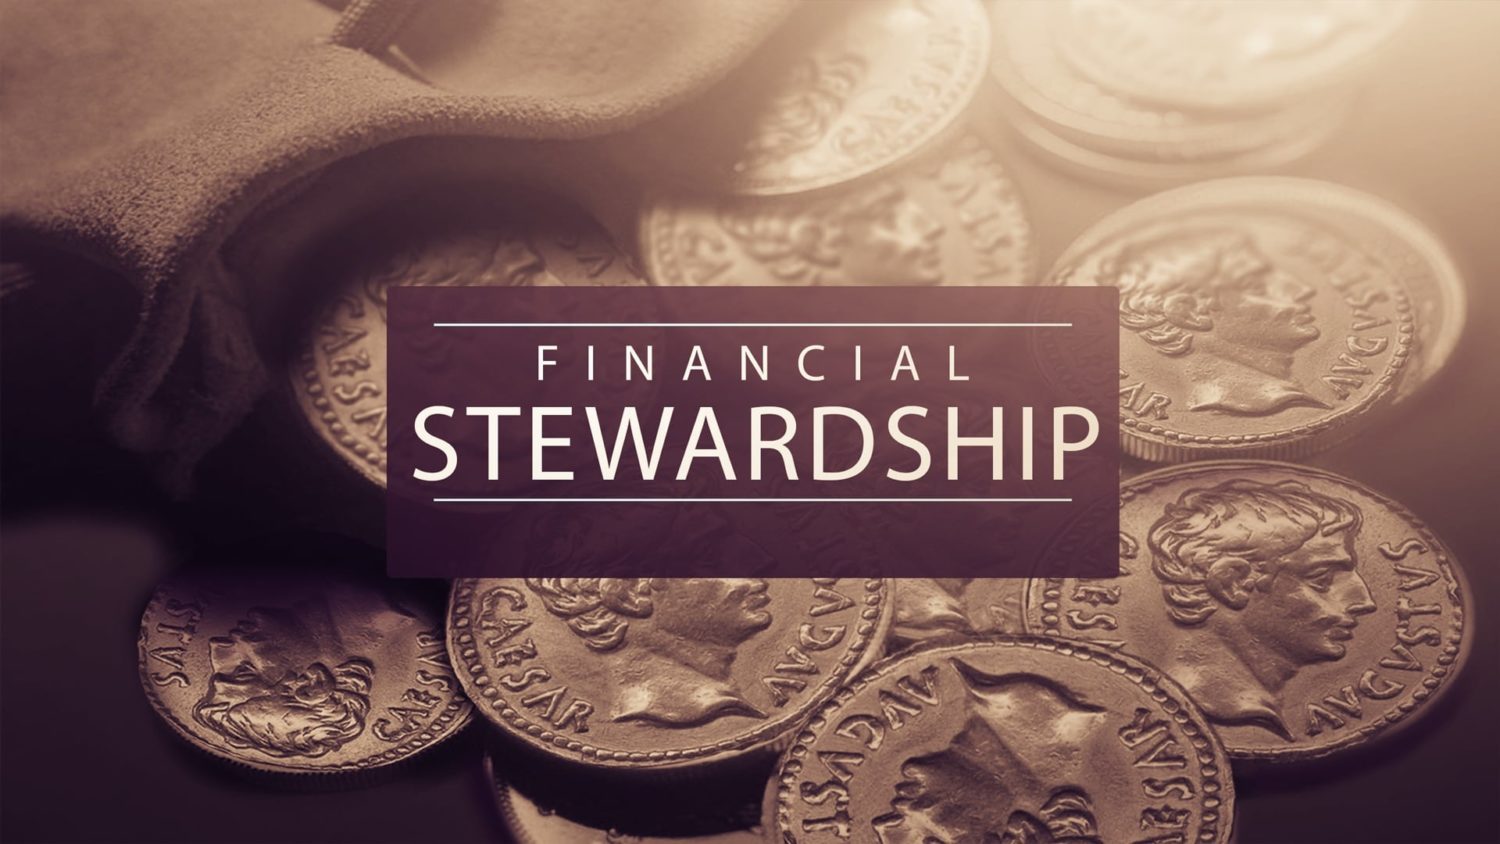 Featured image for “Financial Stewardship”